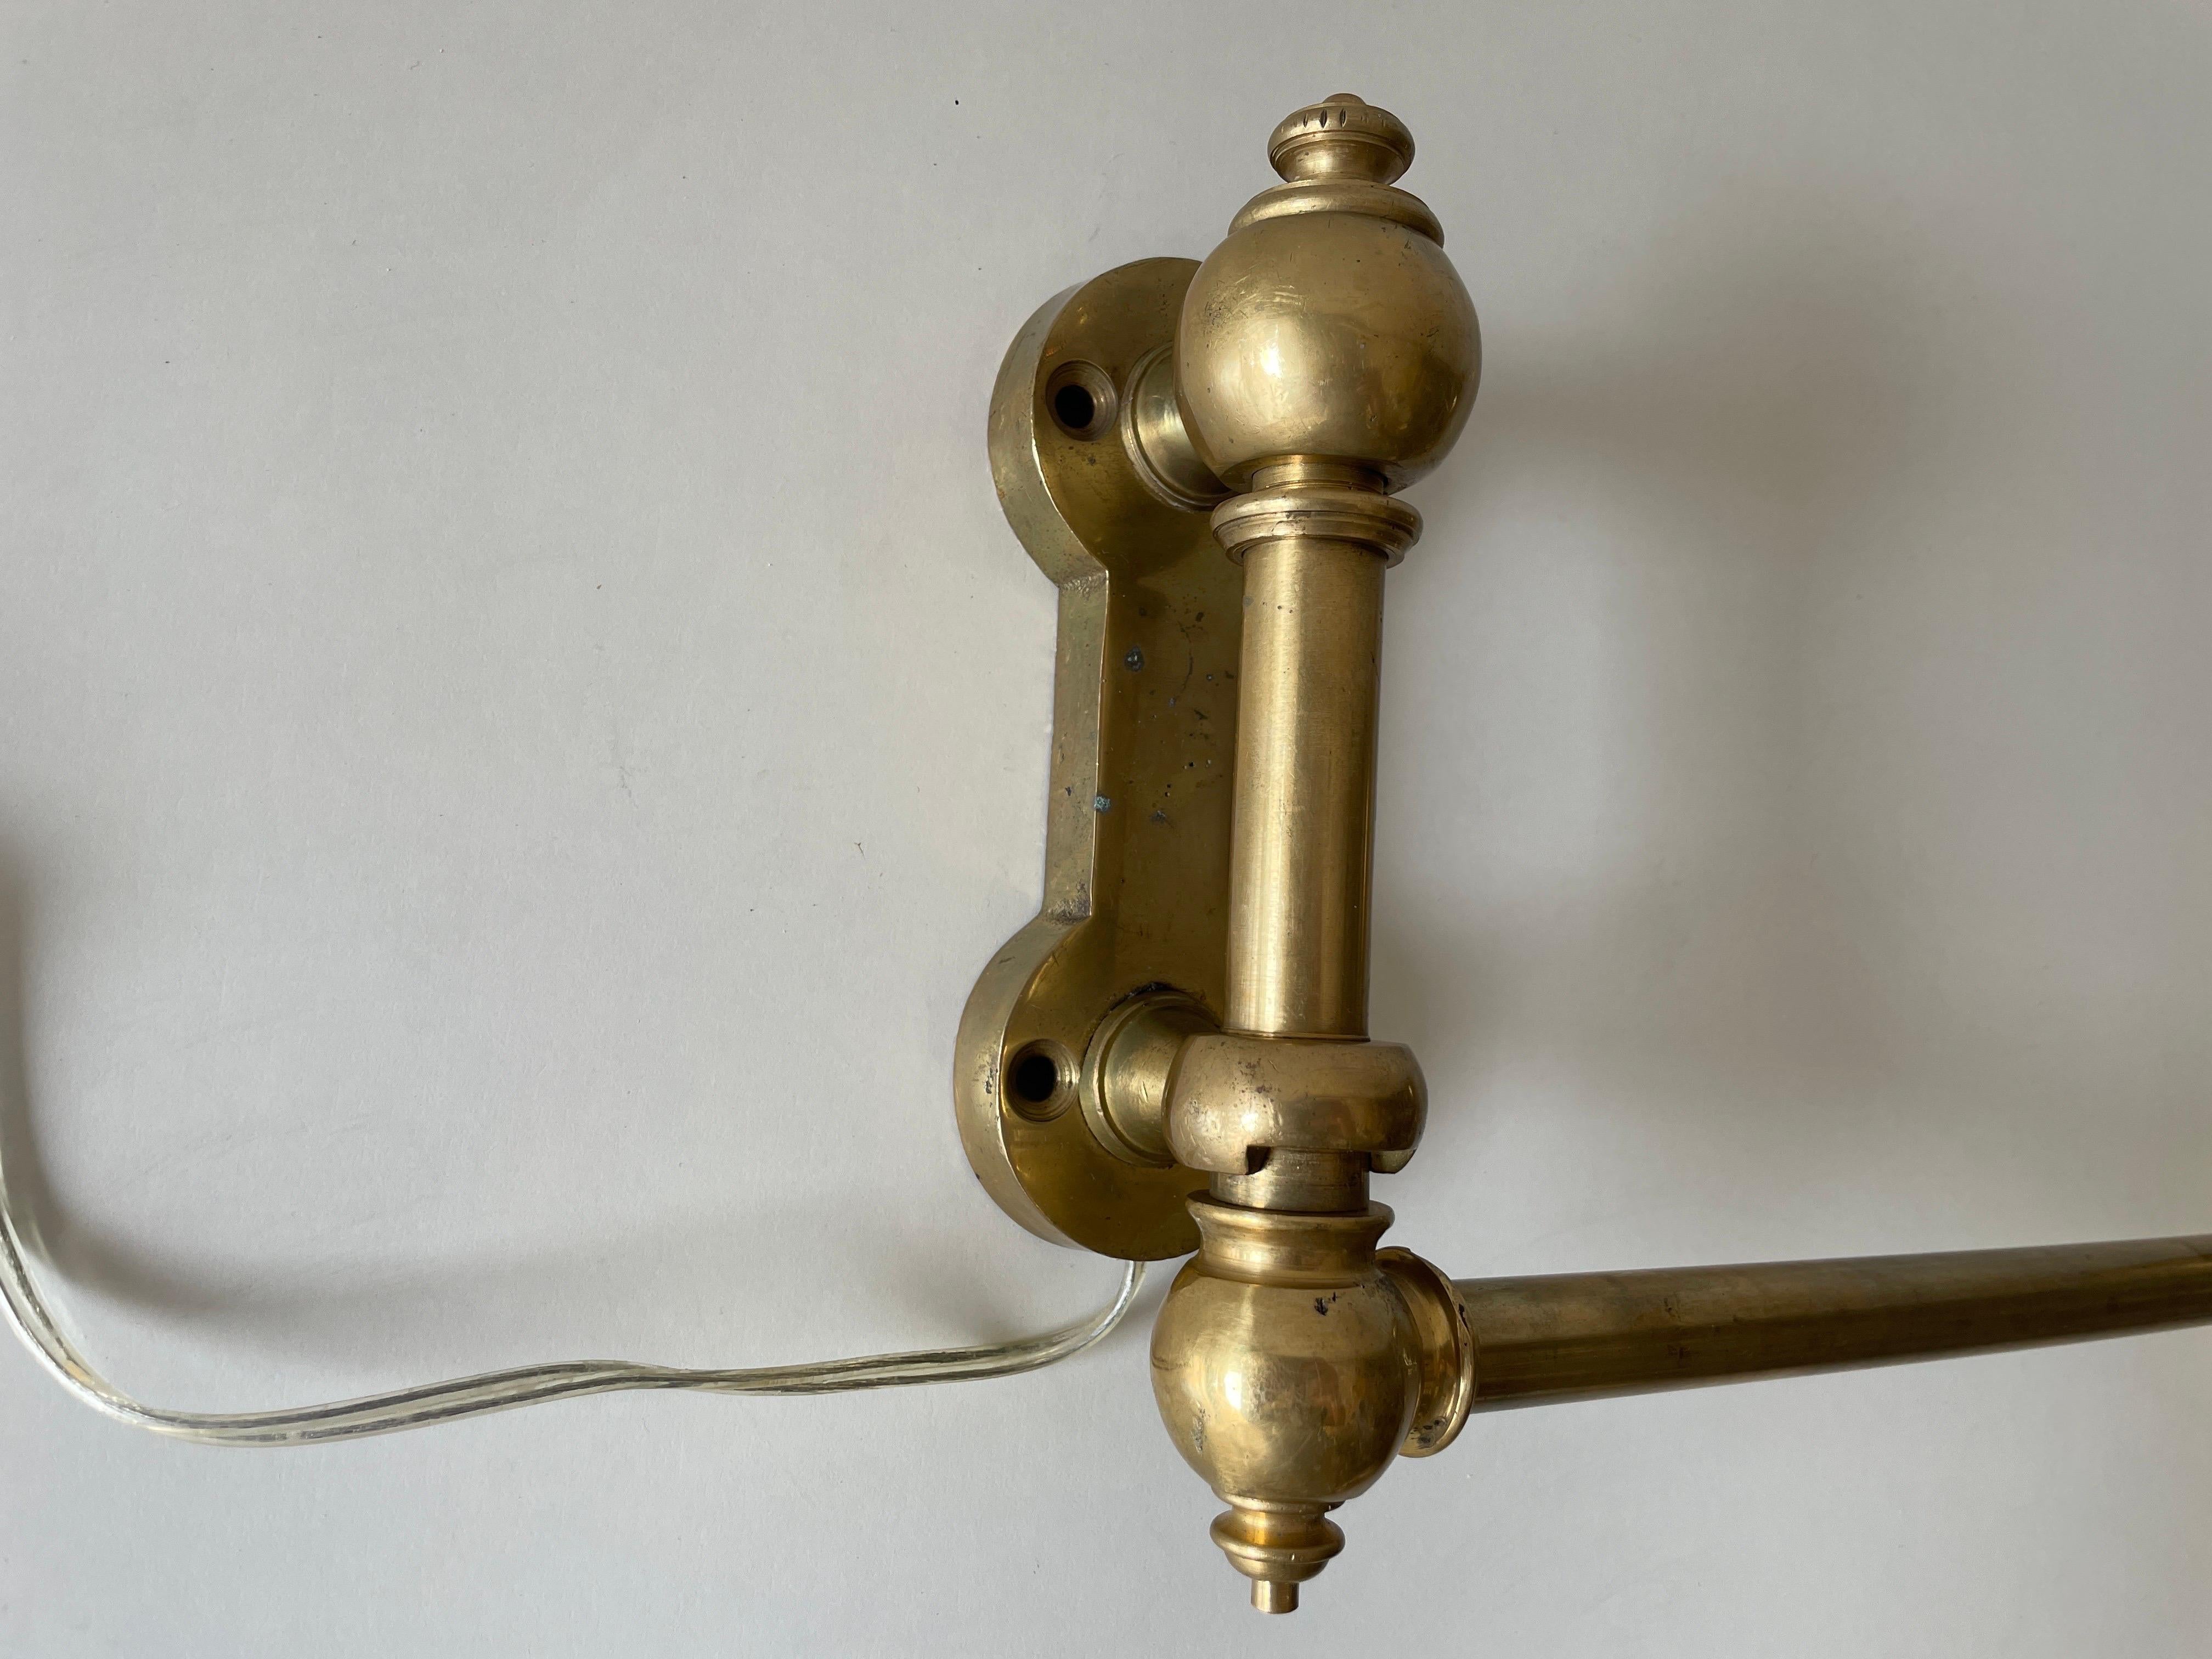 Full Brass Adjustable Head and Arm Industrial Task Wall Lamp, 1940s, Germany For Sale 2